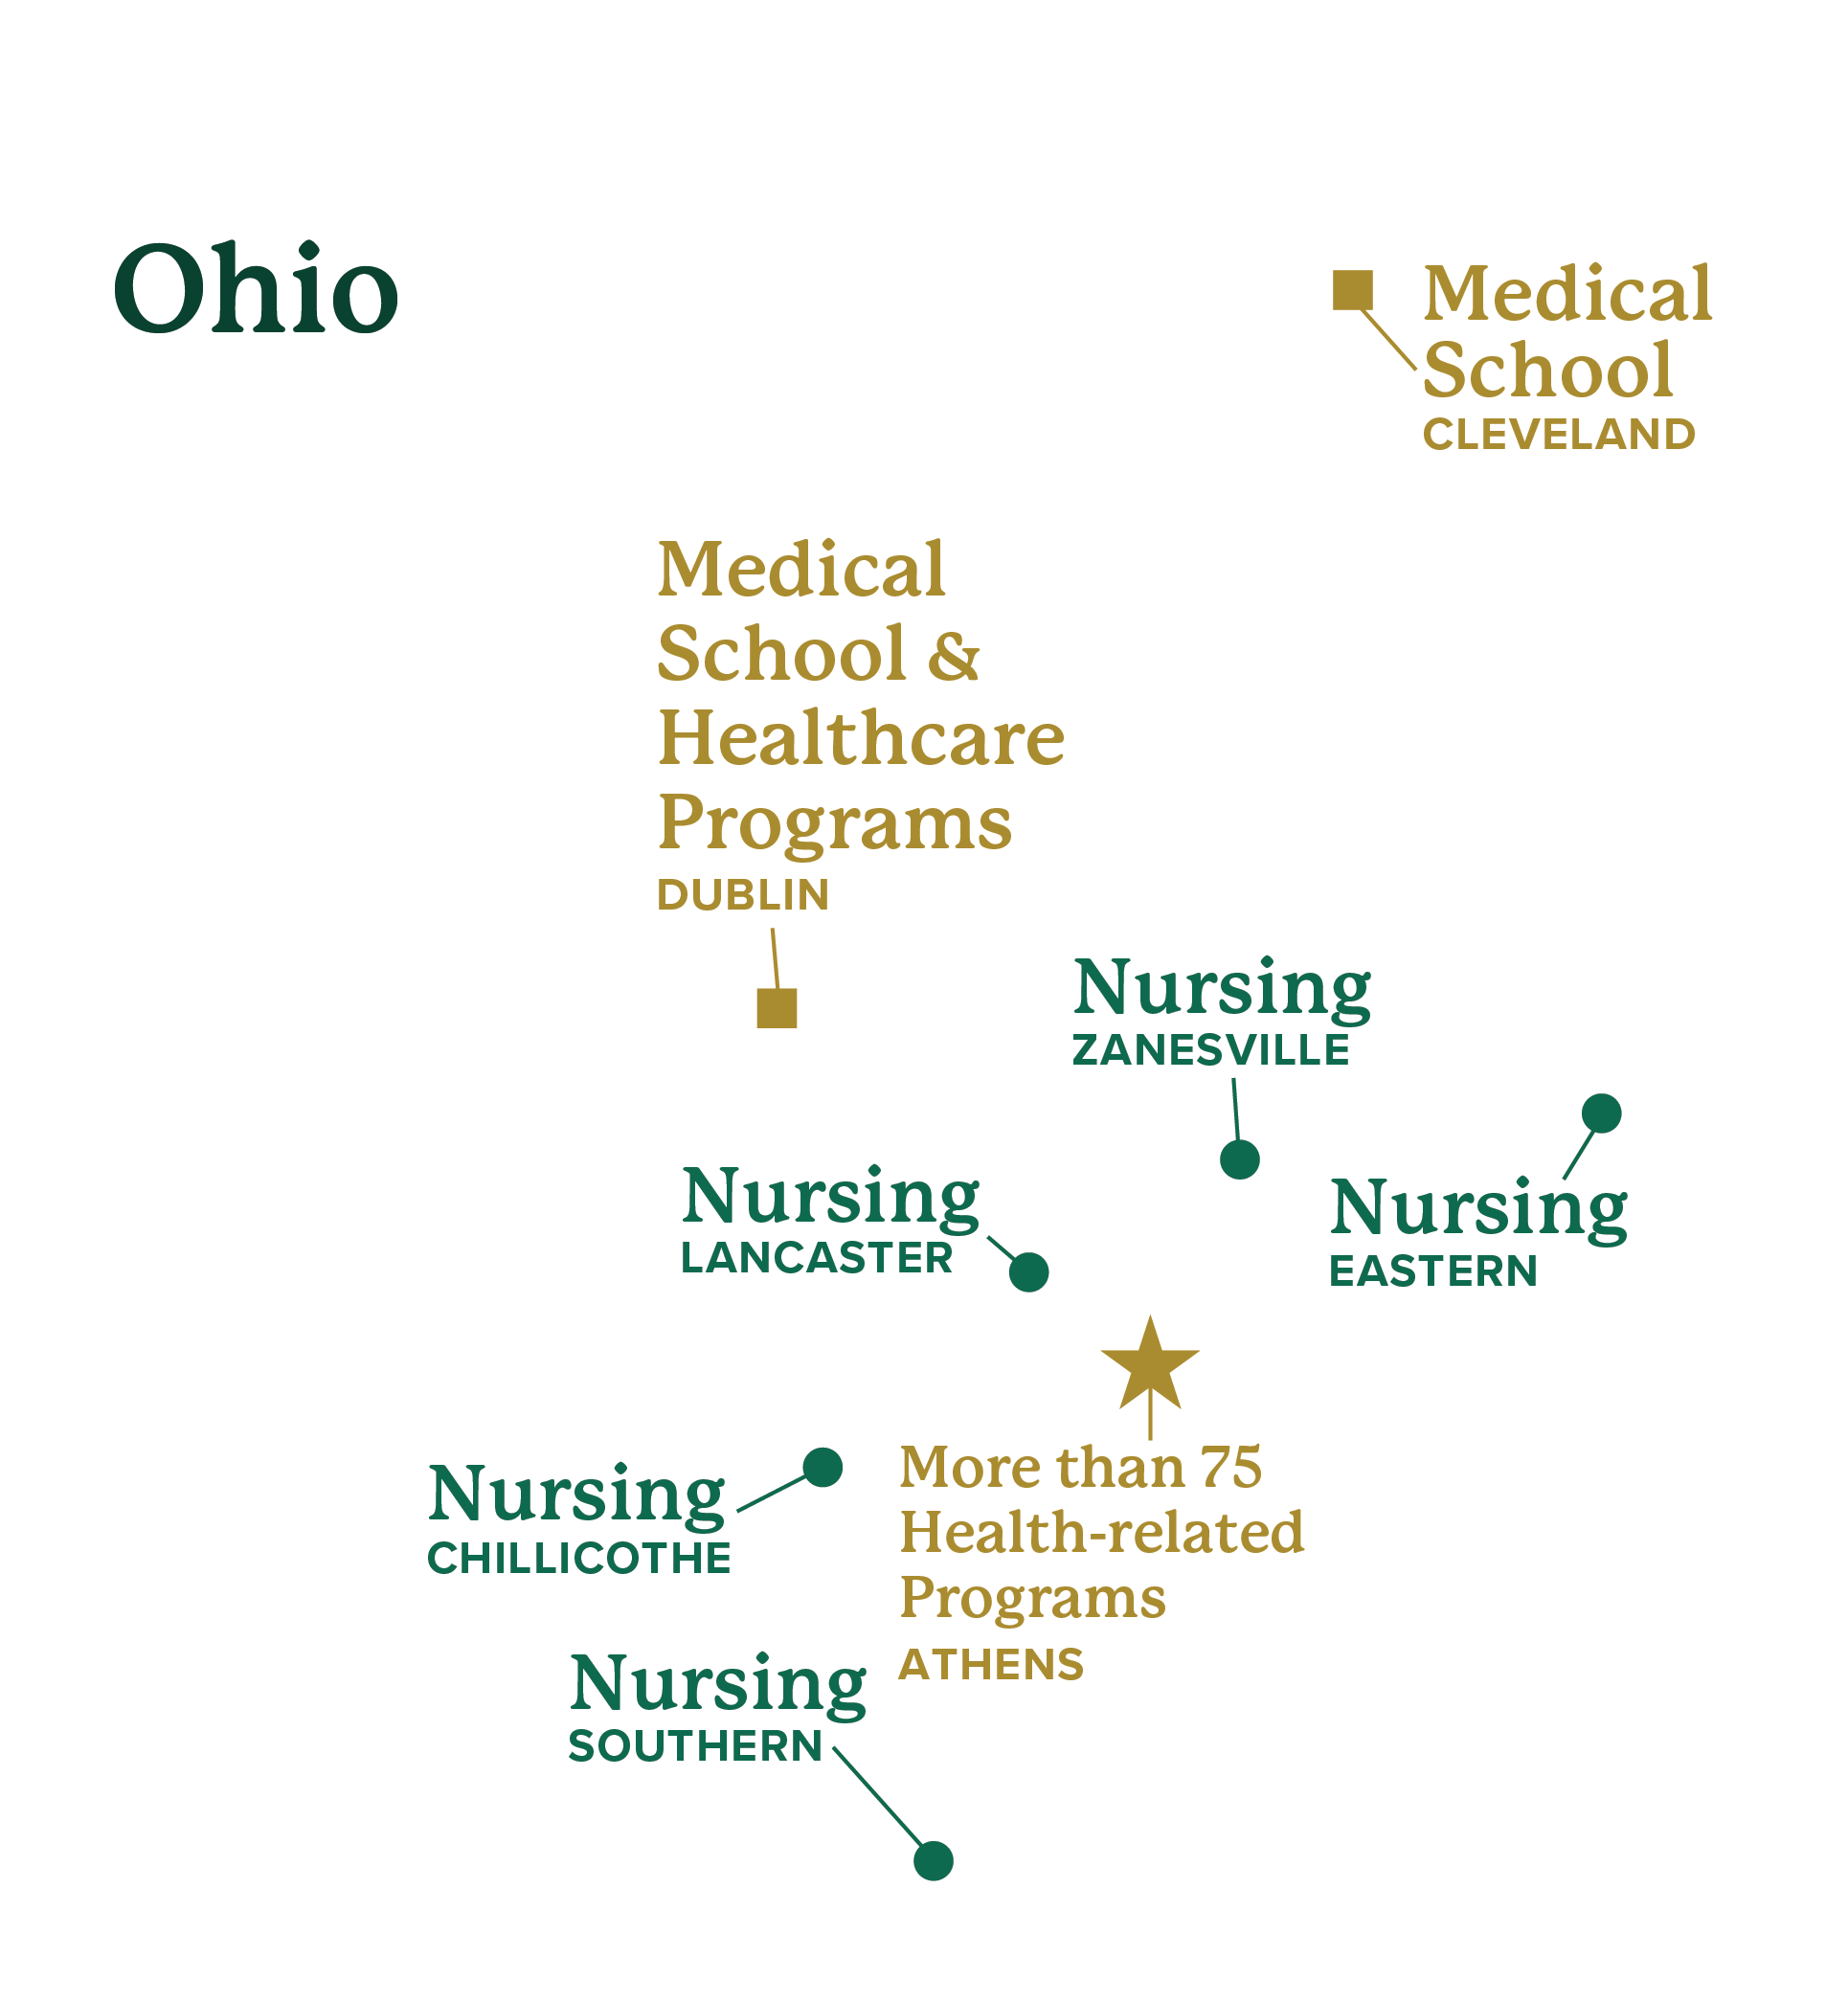 Map of the state of Ohio with Nursing marked in Lancaster, Chillicothe, Southern, Eastern and Zanesville. Medical school is noted at Cleveland. Medical school and healthcare programs at Dublin. "More than 75 health-related programs" marked at Athens.